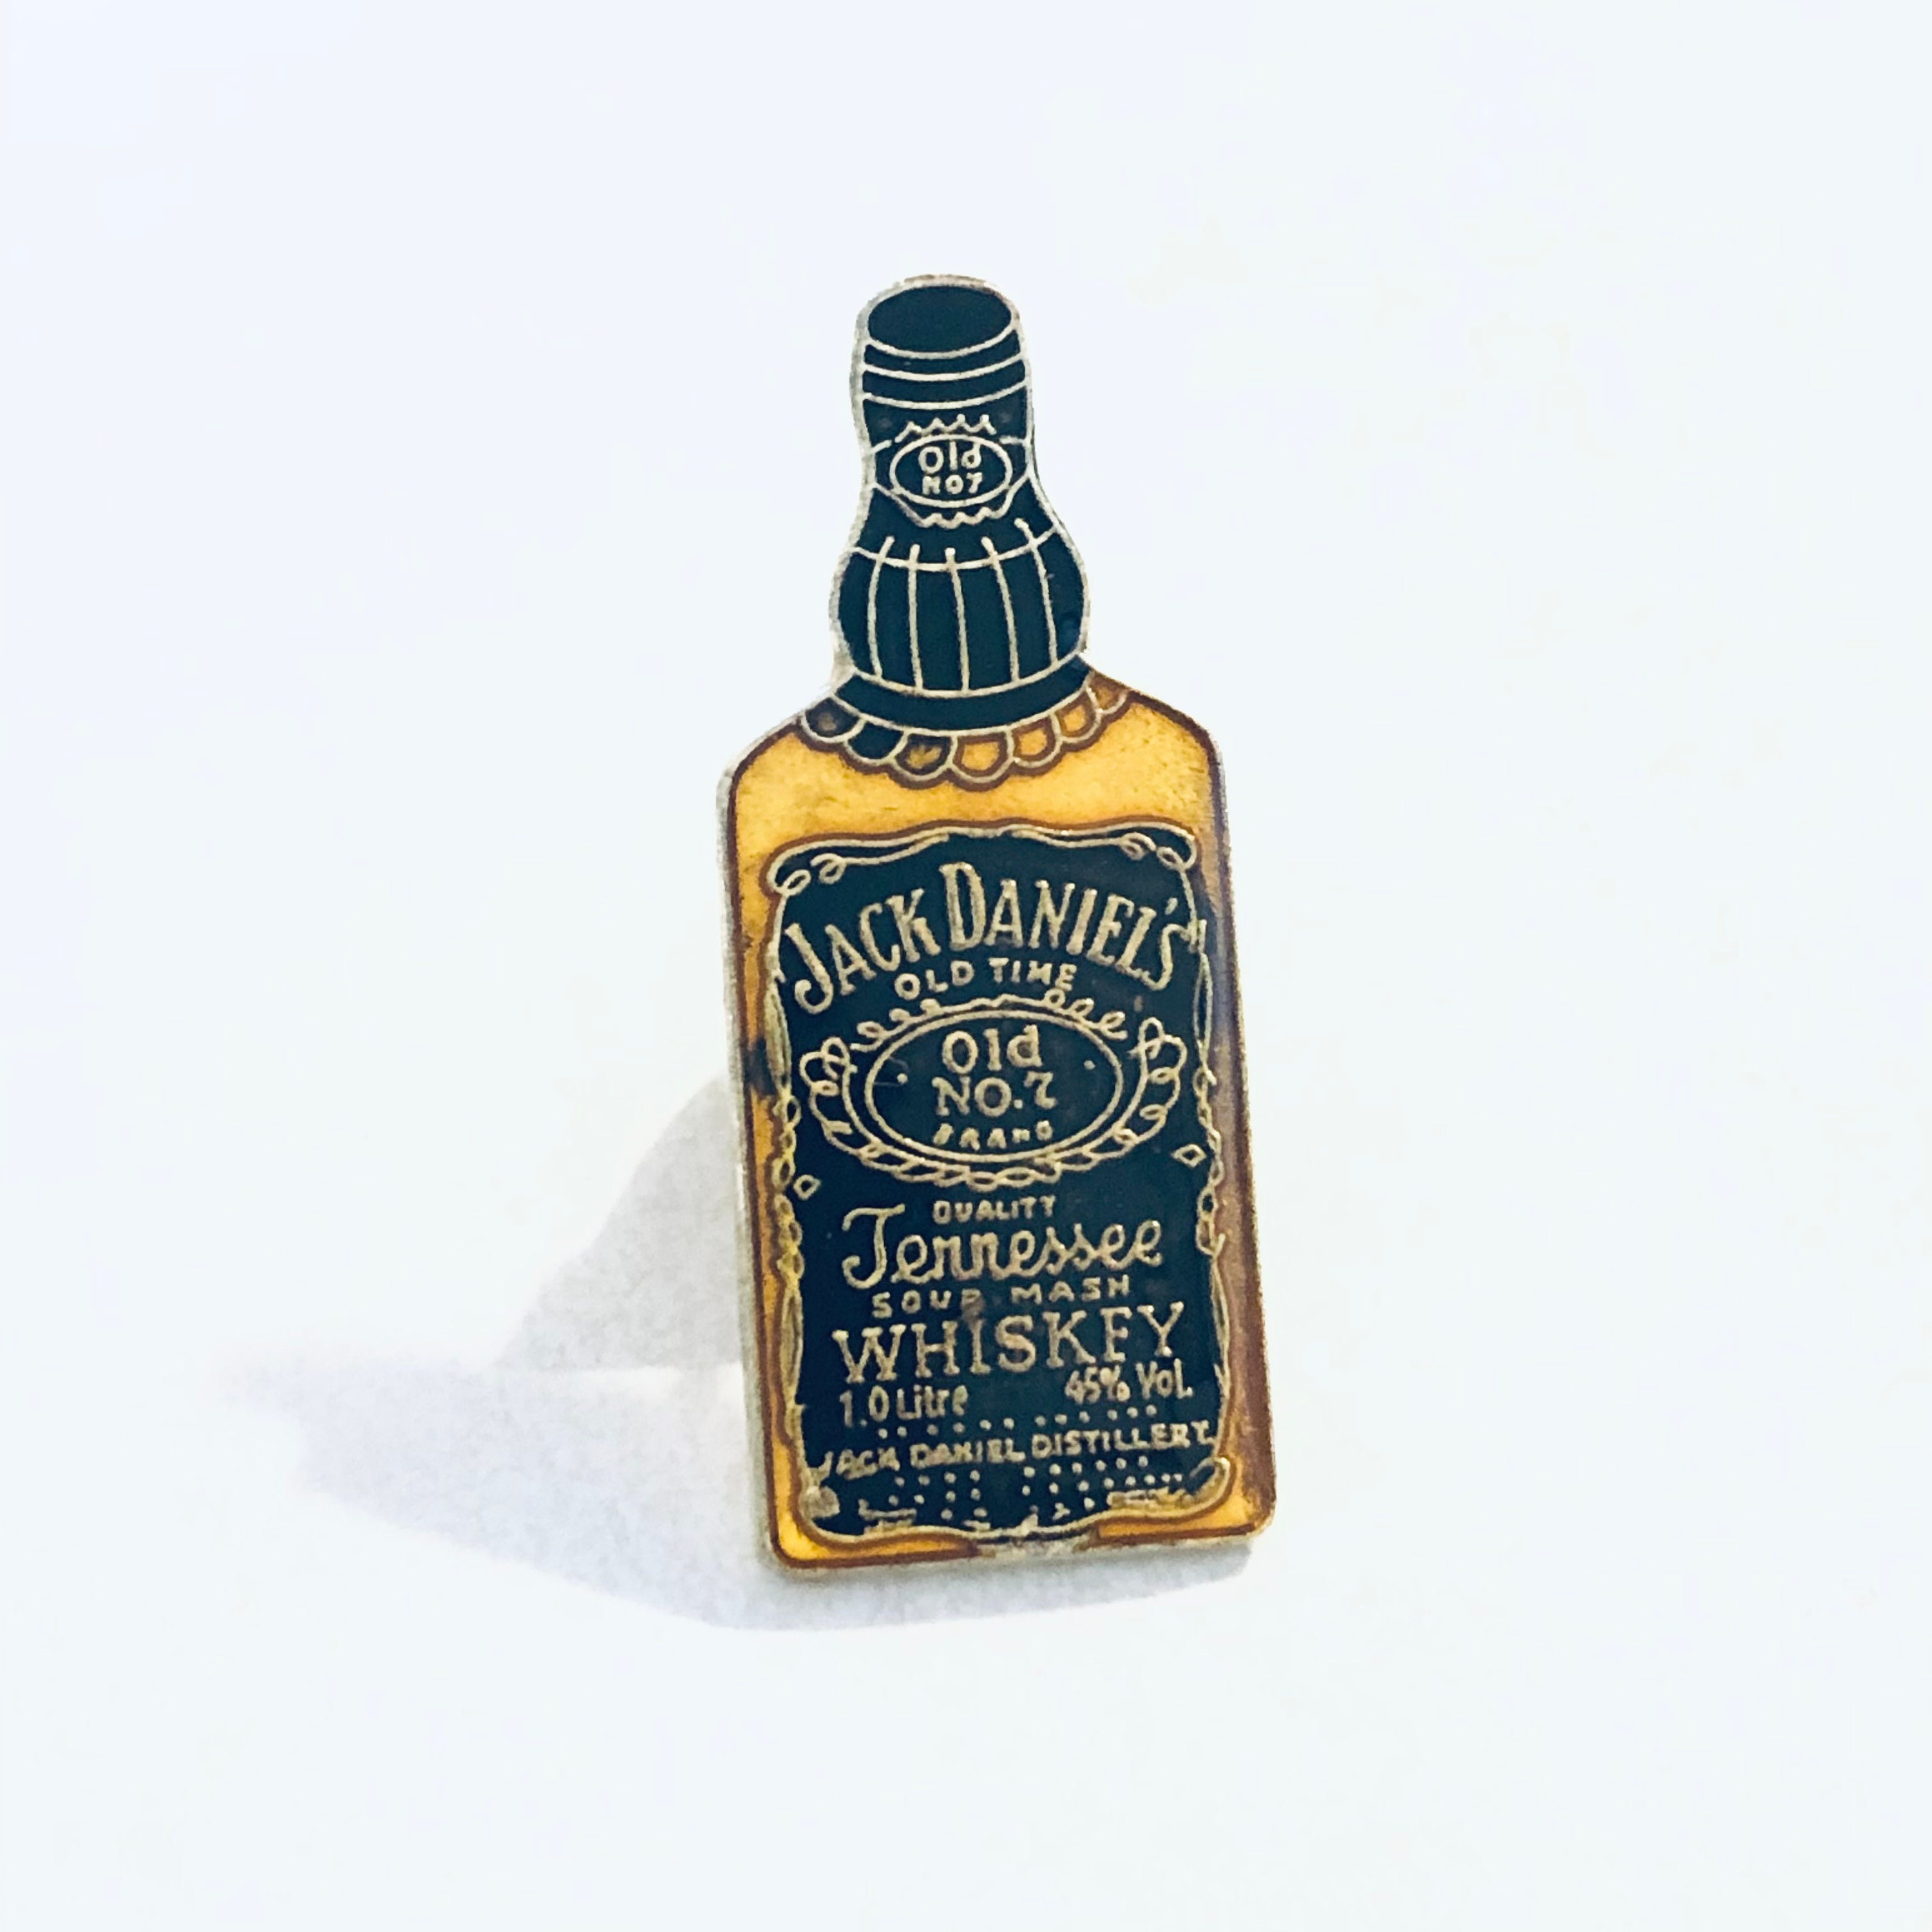 PATCH  ECUSSON brodé  thermocollant  JACK DANIELS  whiskey  whisky 